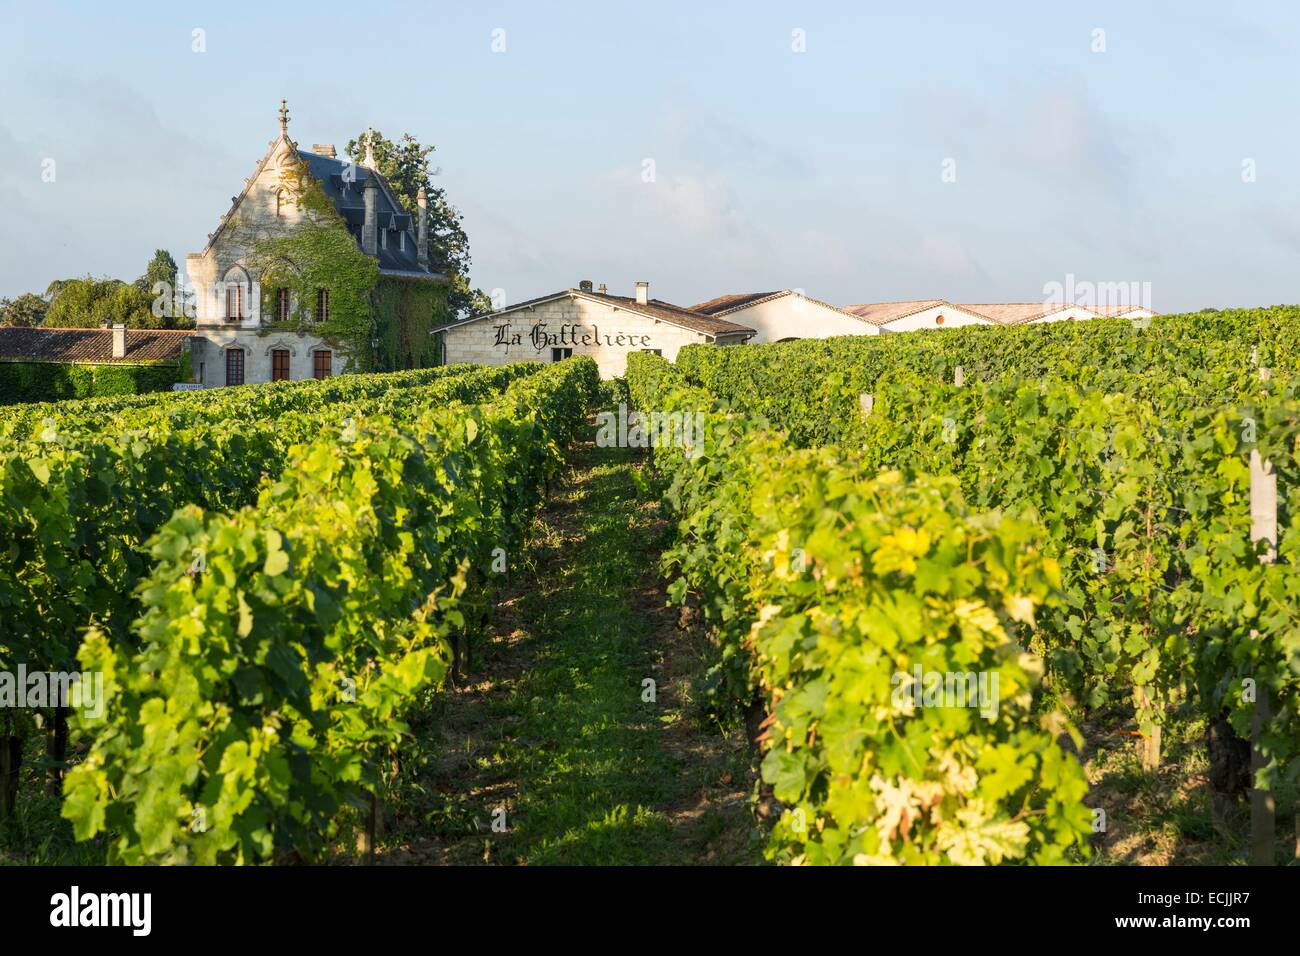 France, Gironde, Saint Emilion, listed as World Heritage by UNESCO, Chateau Gaffeliere and these vineyards Stock Photo